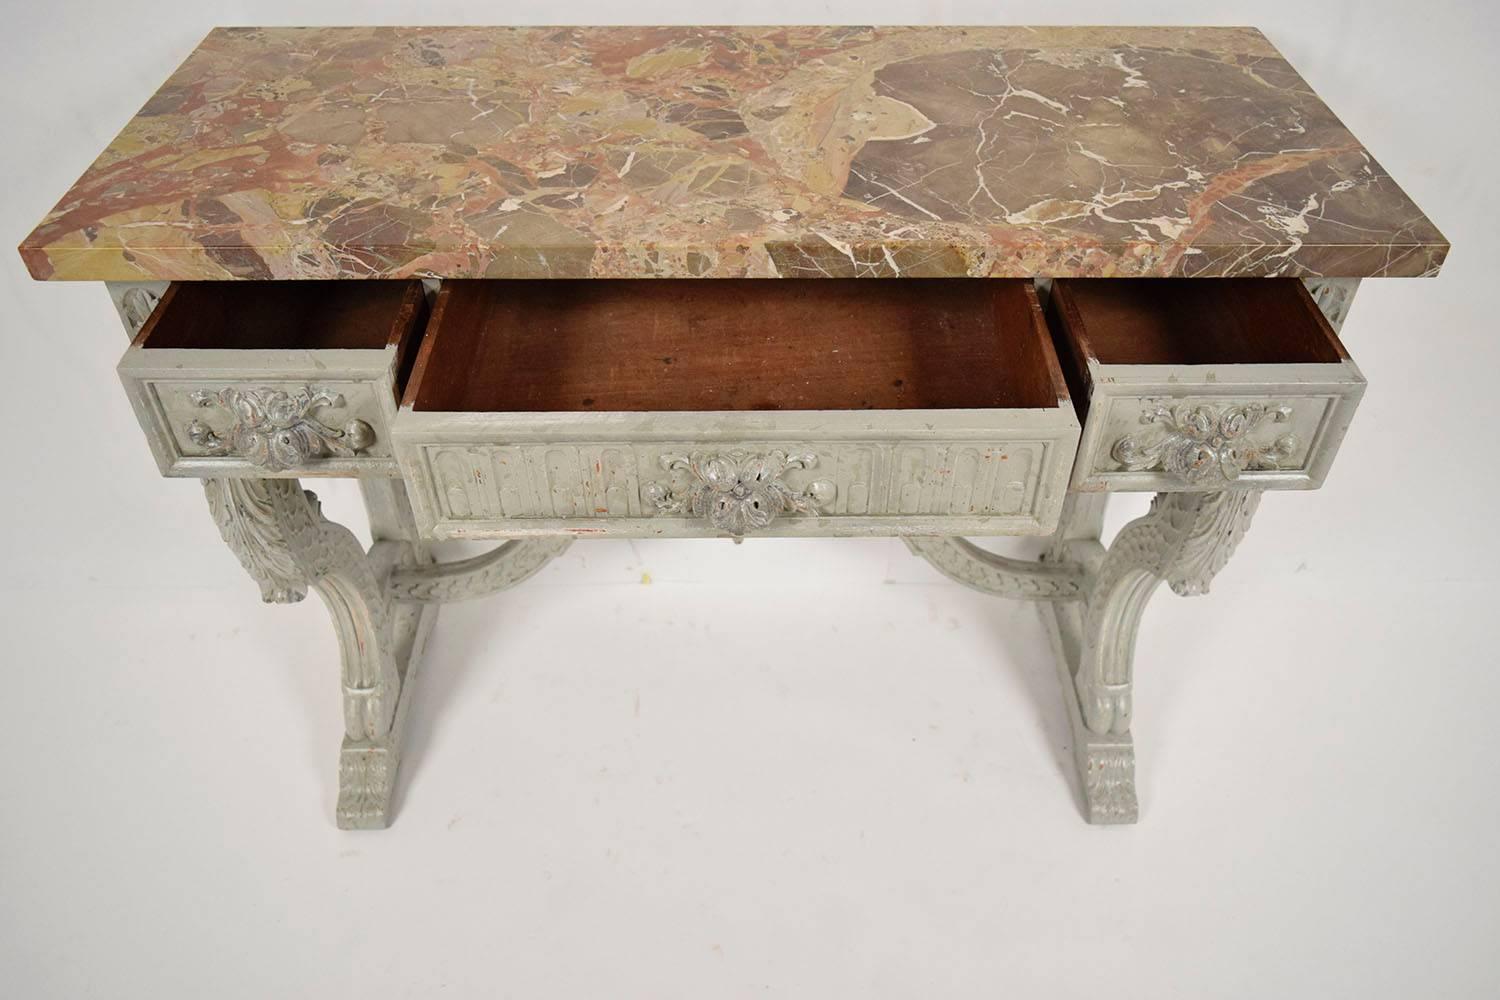 This is a 1890s French console in Louis XVI style. Has a thick multicolored marble top. Solid walnut wood, newly painted in a light gray color with a distressed finish. Frame is heavily carved with, flowers, scrolls, leaves, and sea shells. The top